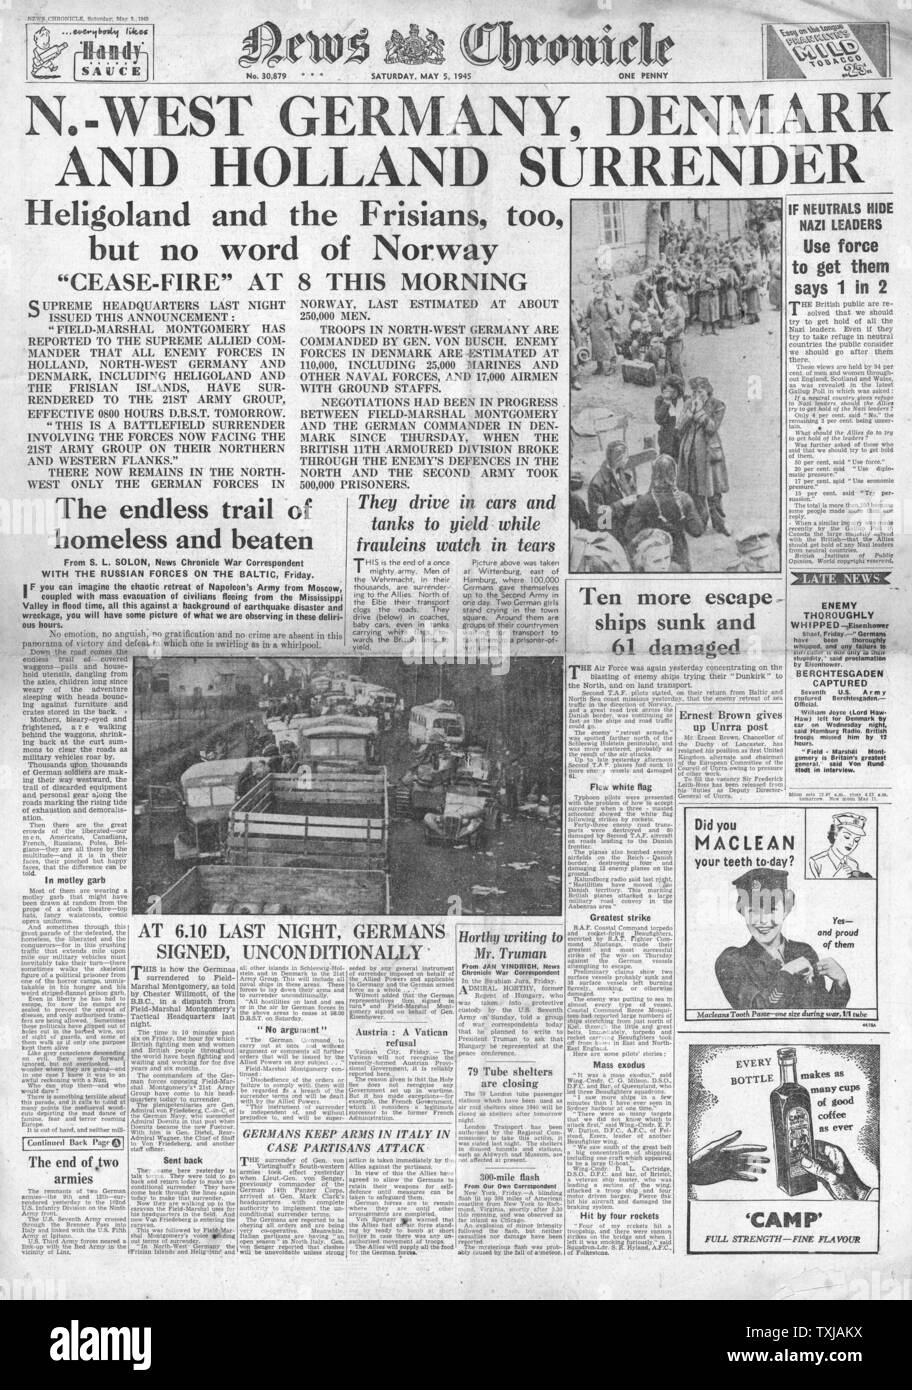 1945 News Chronicle front page reporting Germany Surrenders in Denmark, Holland and N. W. Germany Stock Photo